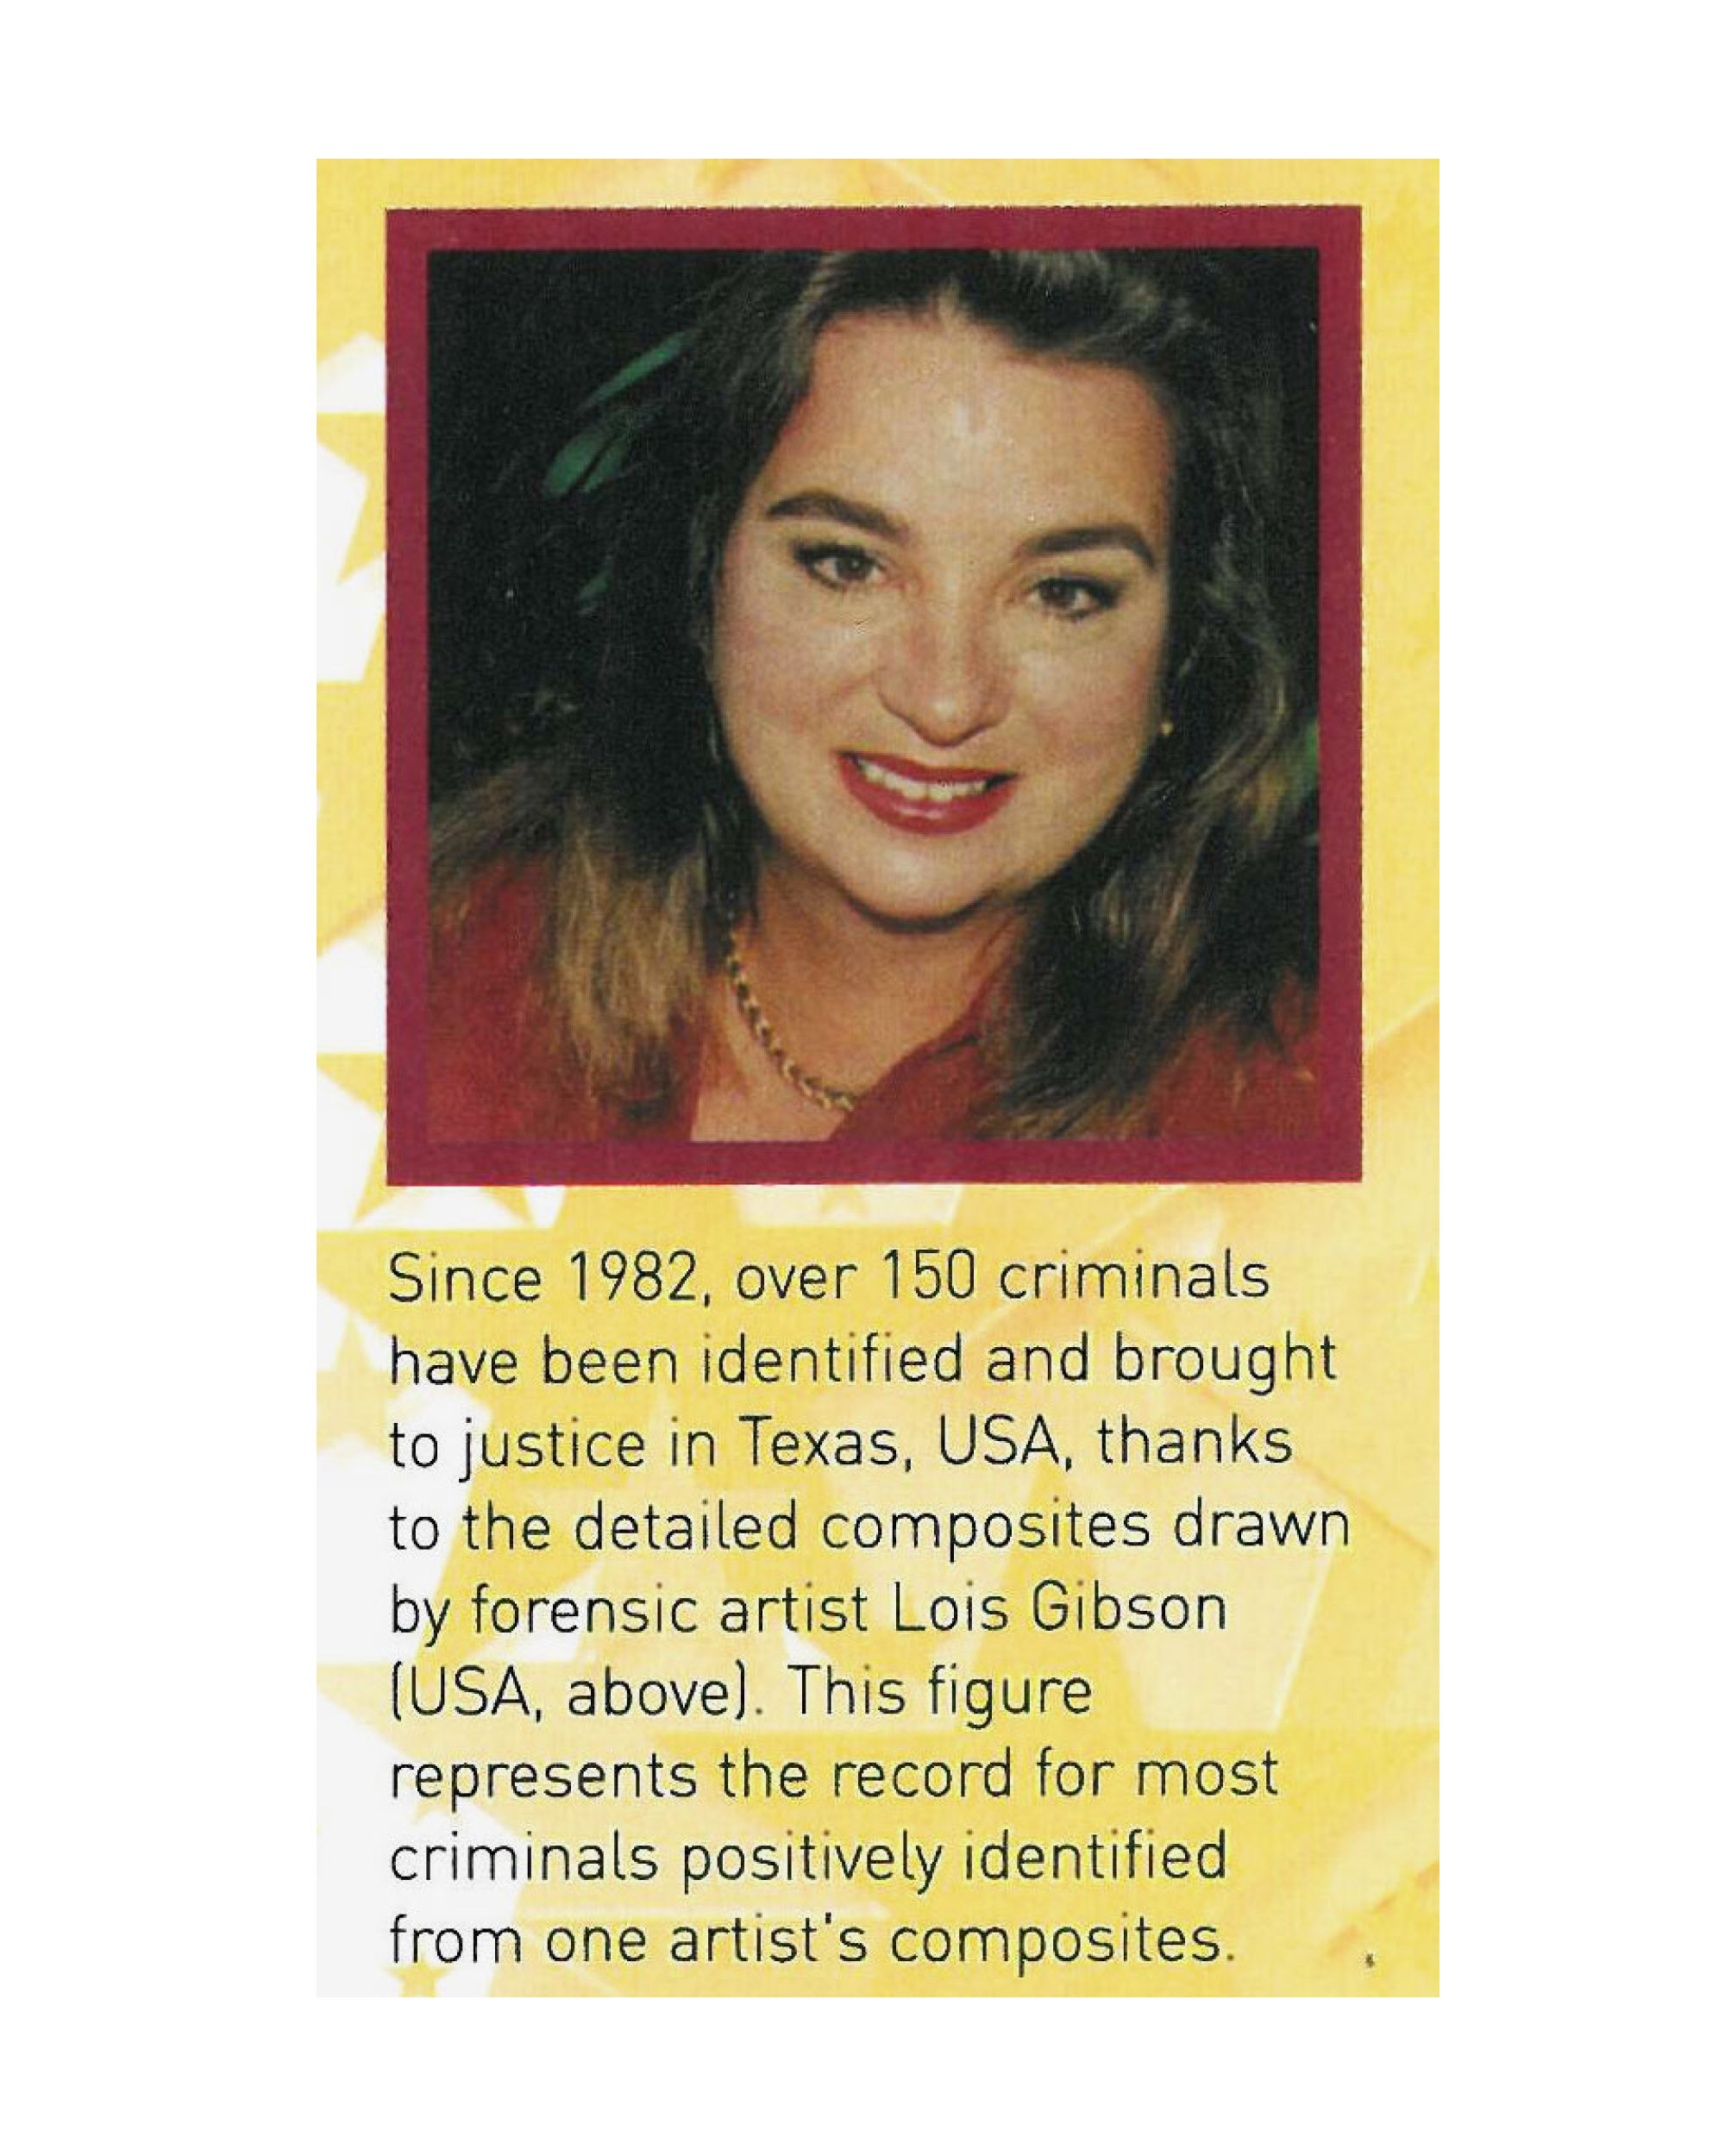 2005 Guinness Book of World Records